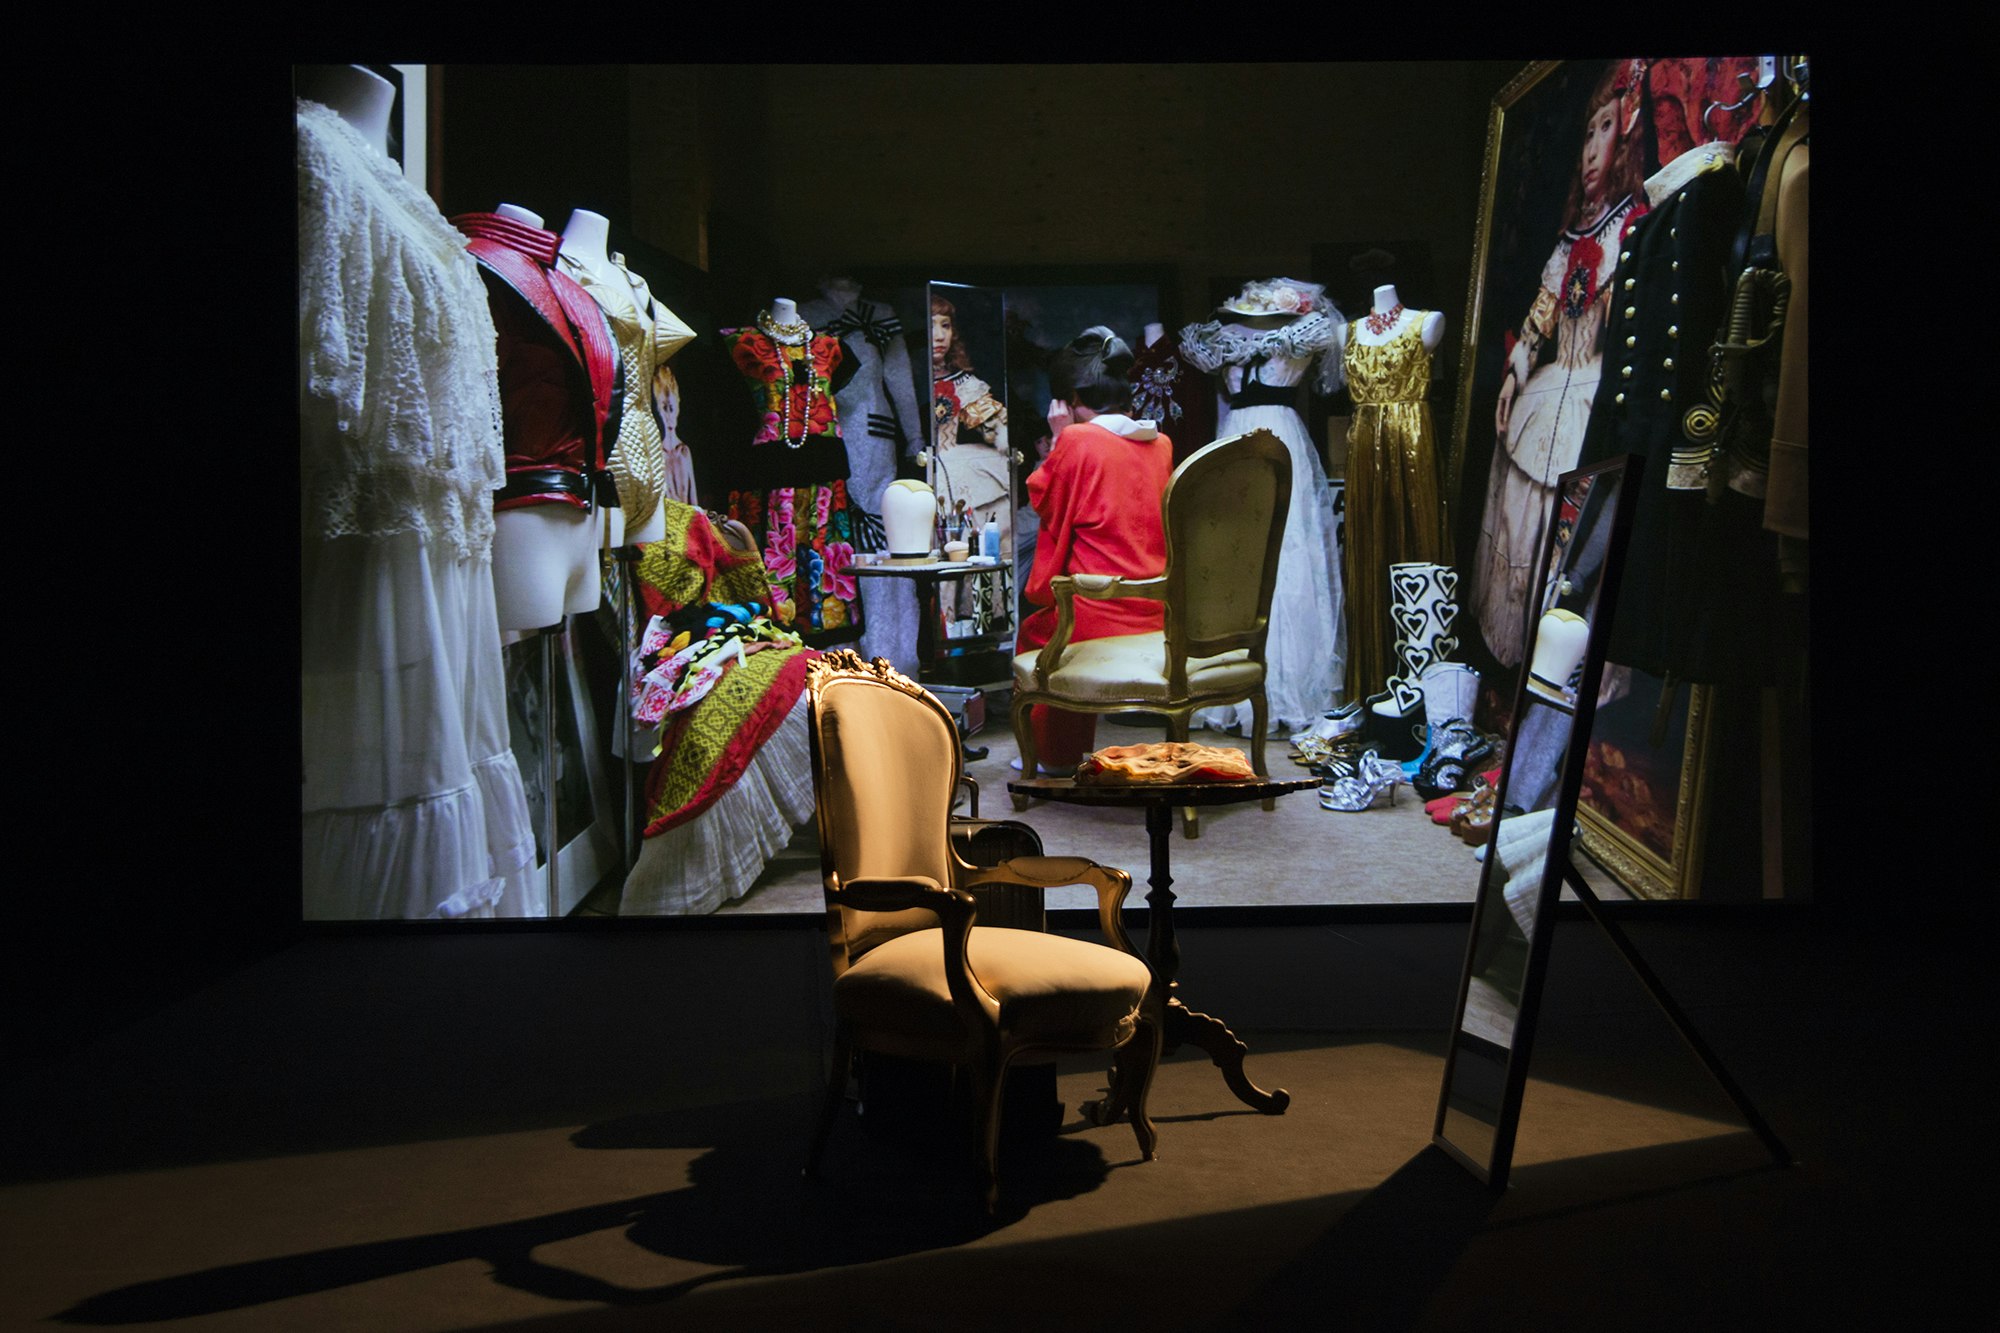 A yellow armchair under a spotlight, next to a wooden table and mirror. Behind is a projection of a figure dressed as a Japanese geisha with their back to us, surrounded by mannequins dressed in floral dresses, golden suits and floor-length dresses, with a Yasumasa Morimura painting of a girl in historical dress framed in gold in the corner.